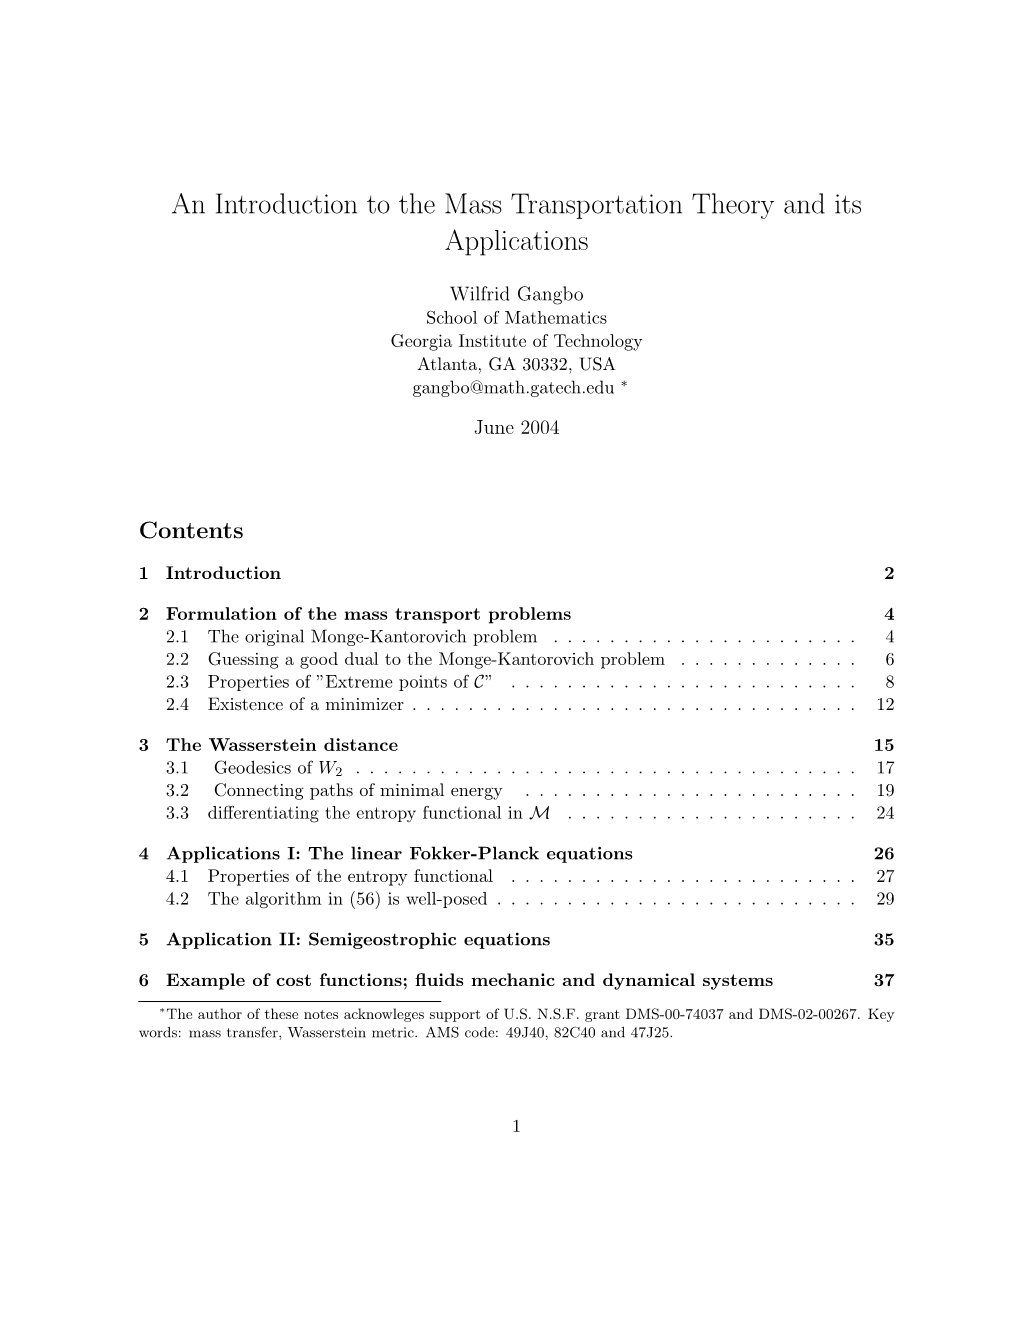 An Introduction to the Mass Transportation Theory and Its Applications